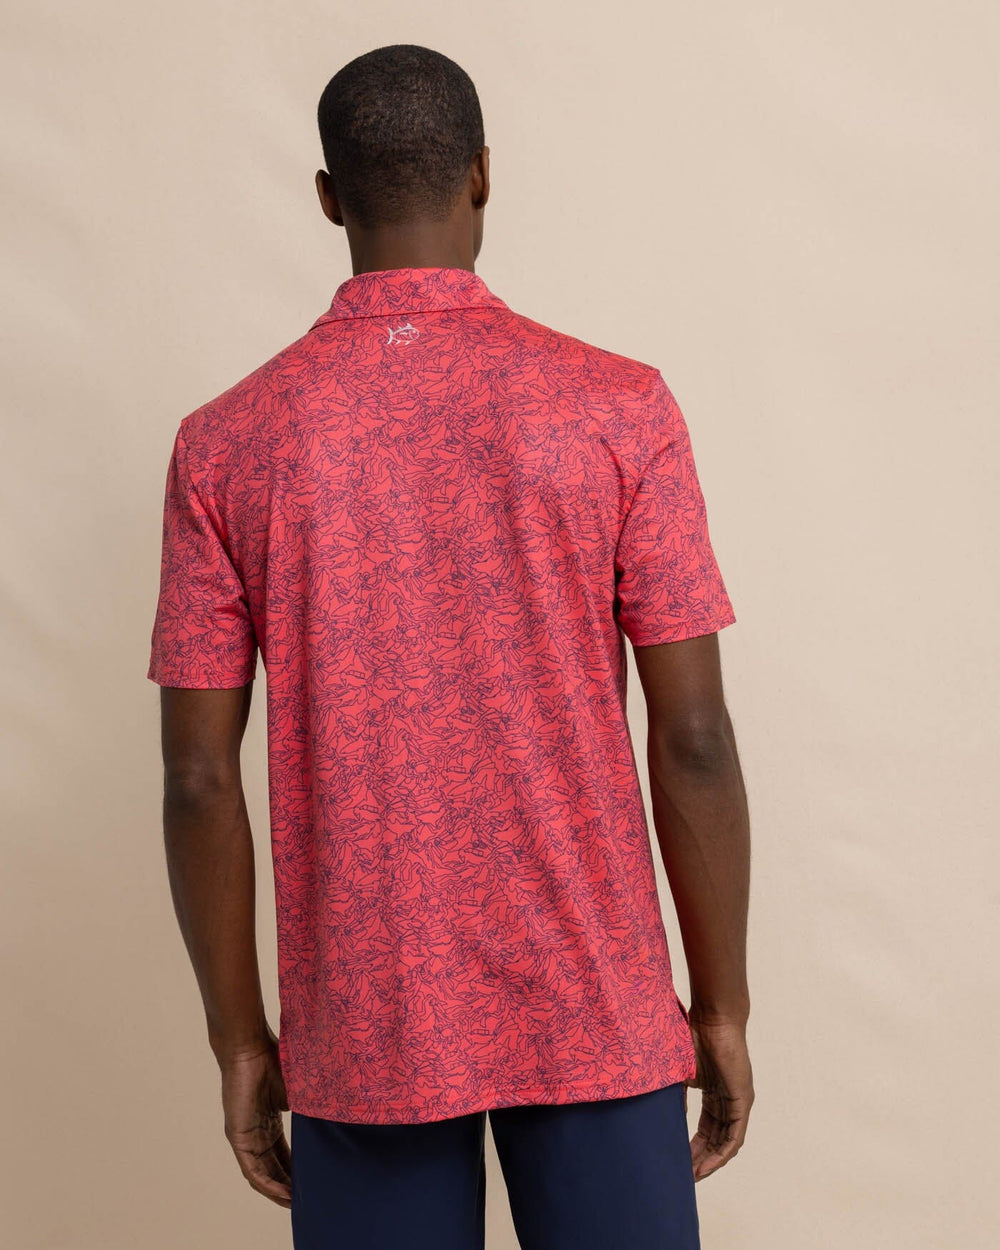 The back view of the Southern Tide Driver Dive In Polo Shirt by Southern Tide - Teaberry Pink